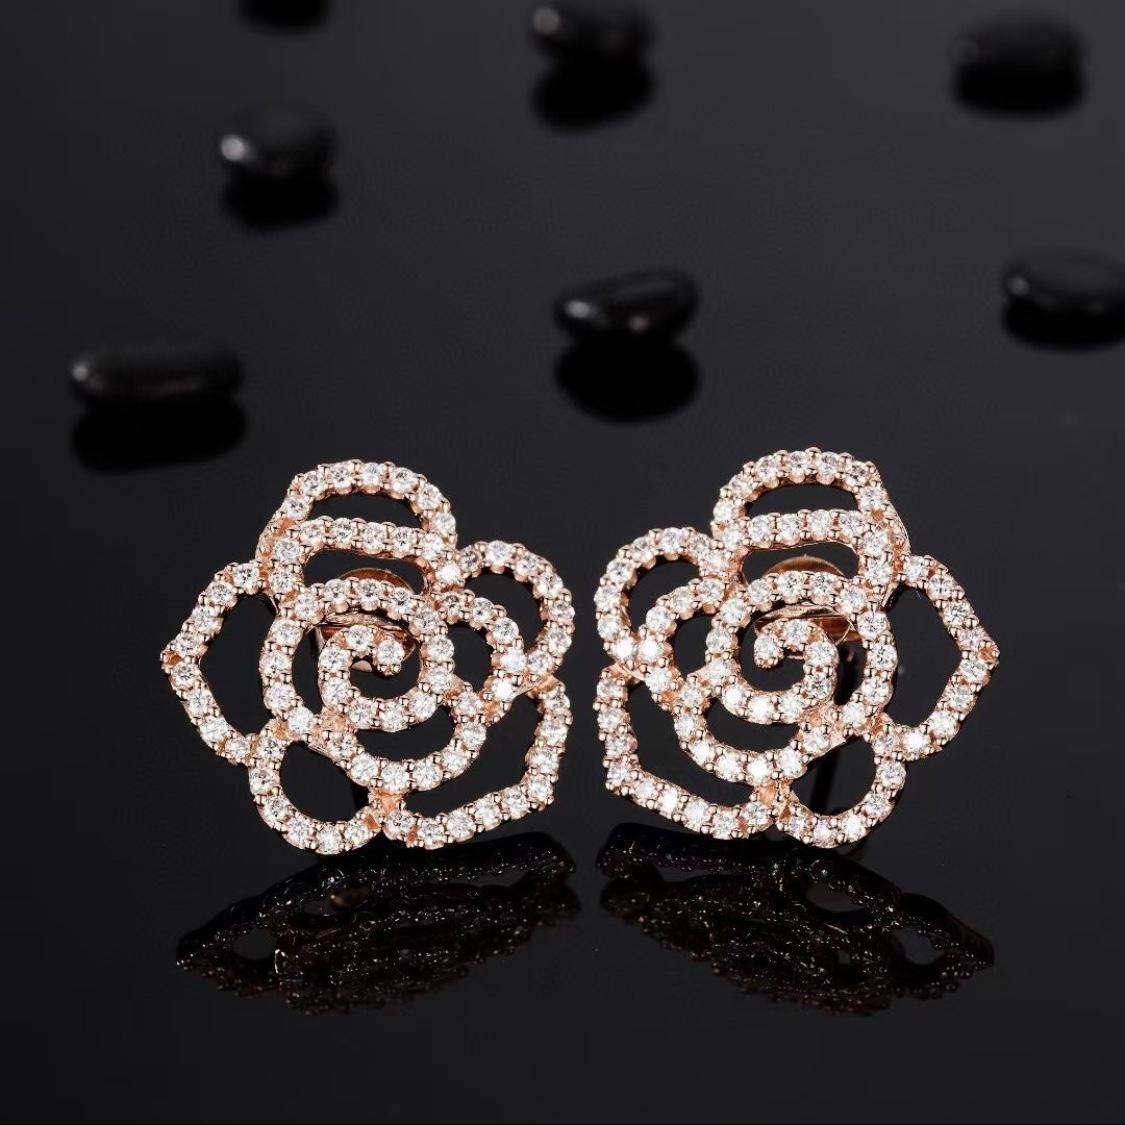 Start with a wire , whispering the breeze of Sunday light .
Hand craft 18k gold diamond ear stud enlightening day by day moments.

A rose is a rose is a rose.